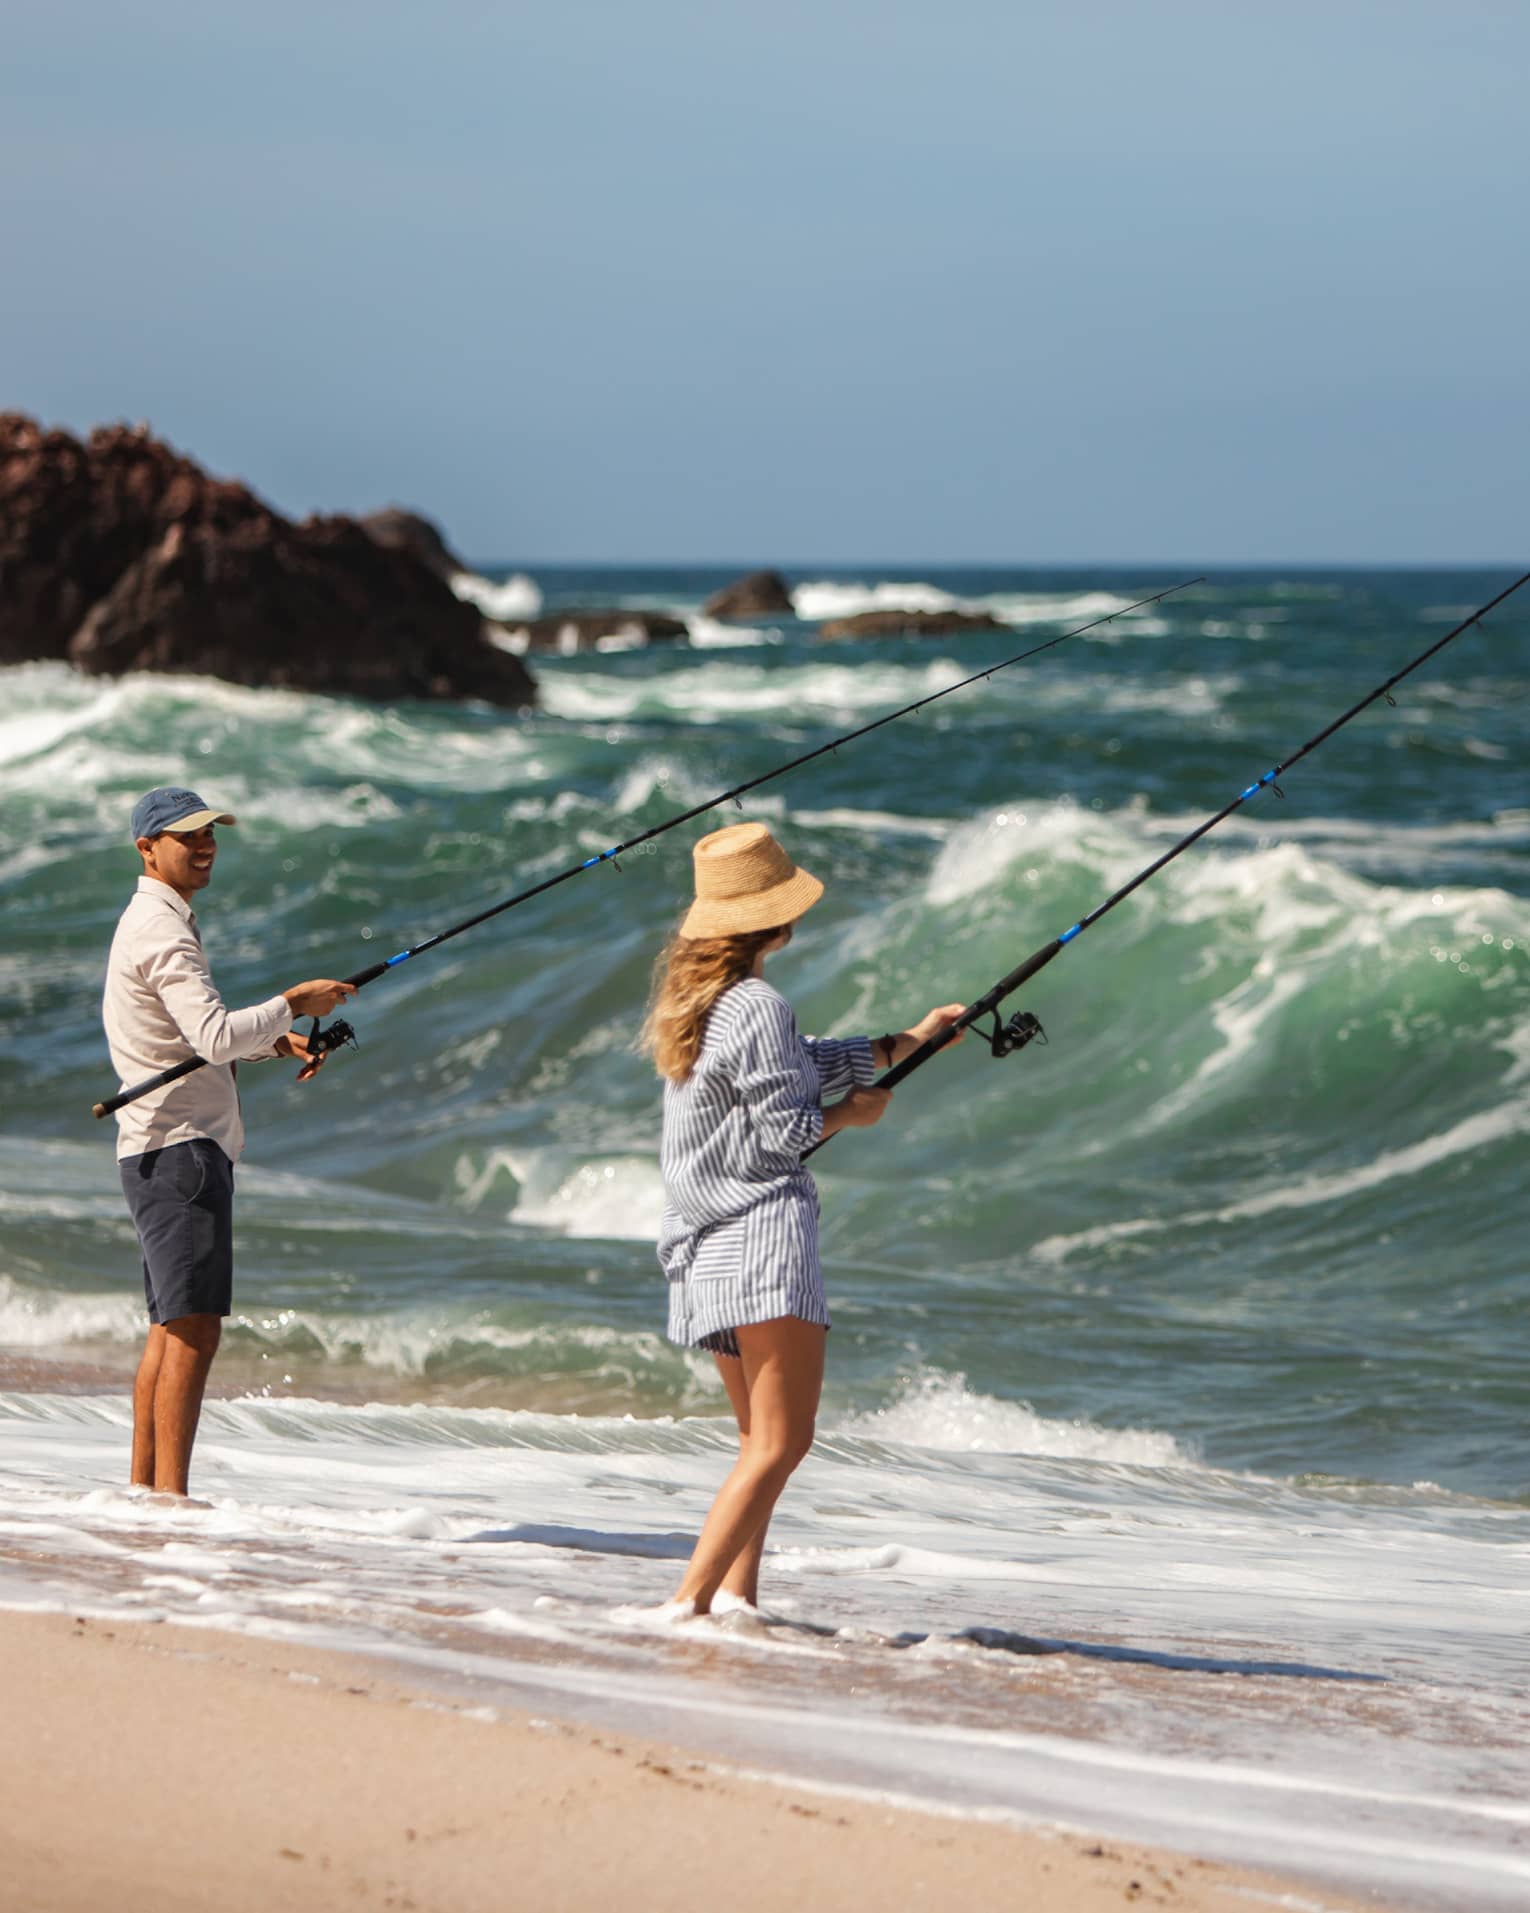 Two people fishing on a beach shore.